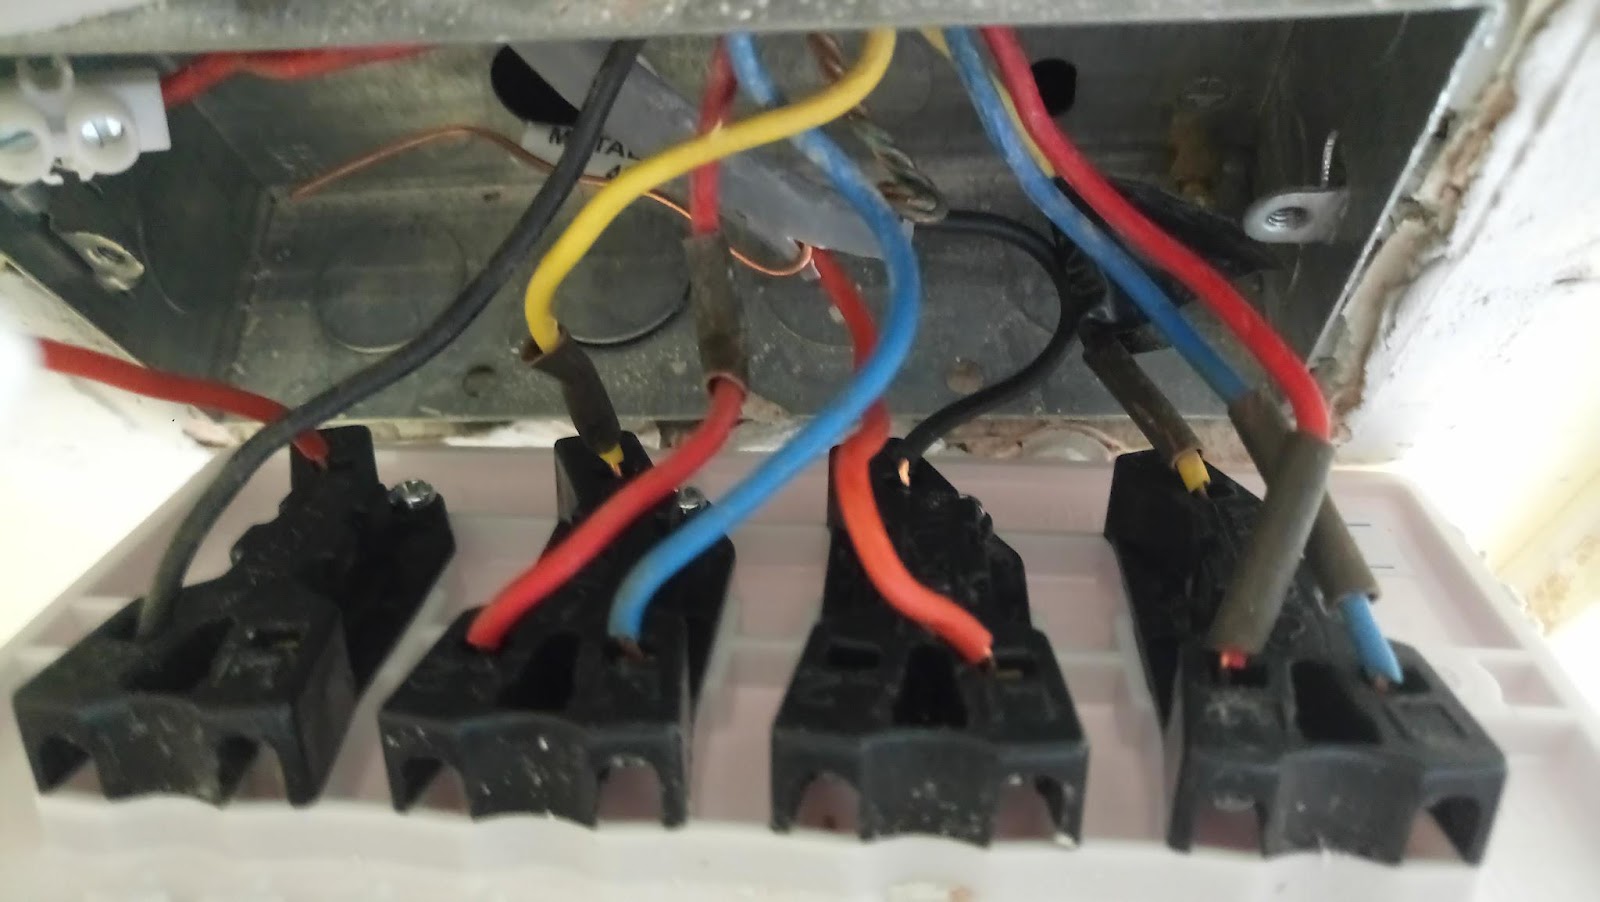 Lights - Why is the my supply switch controlling my new one? {filename} | ElectriciansForums.net